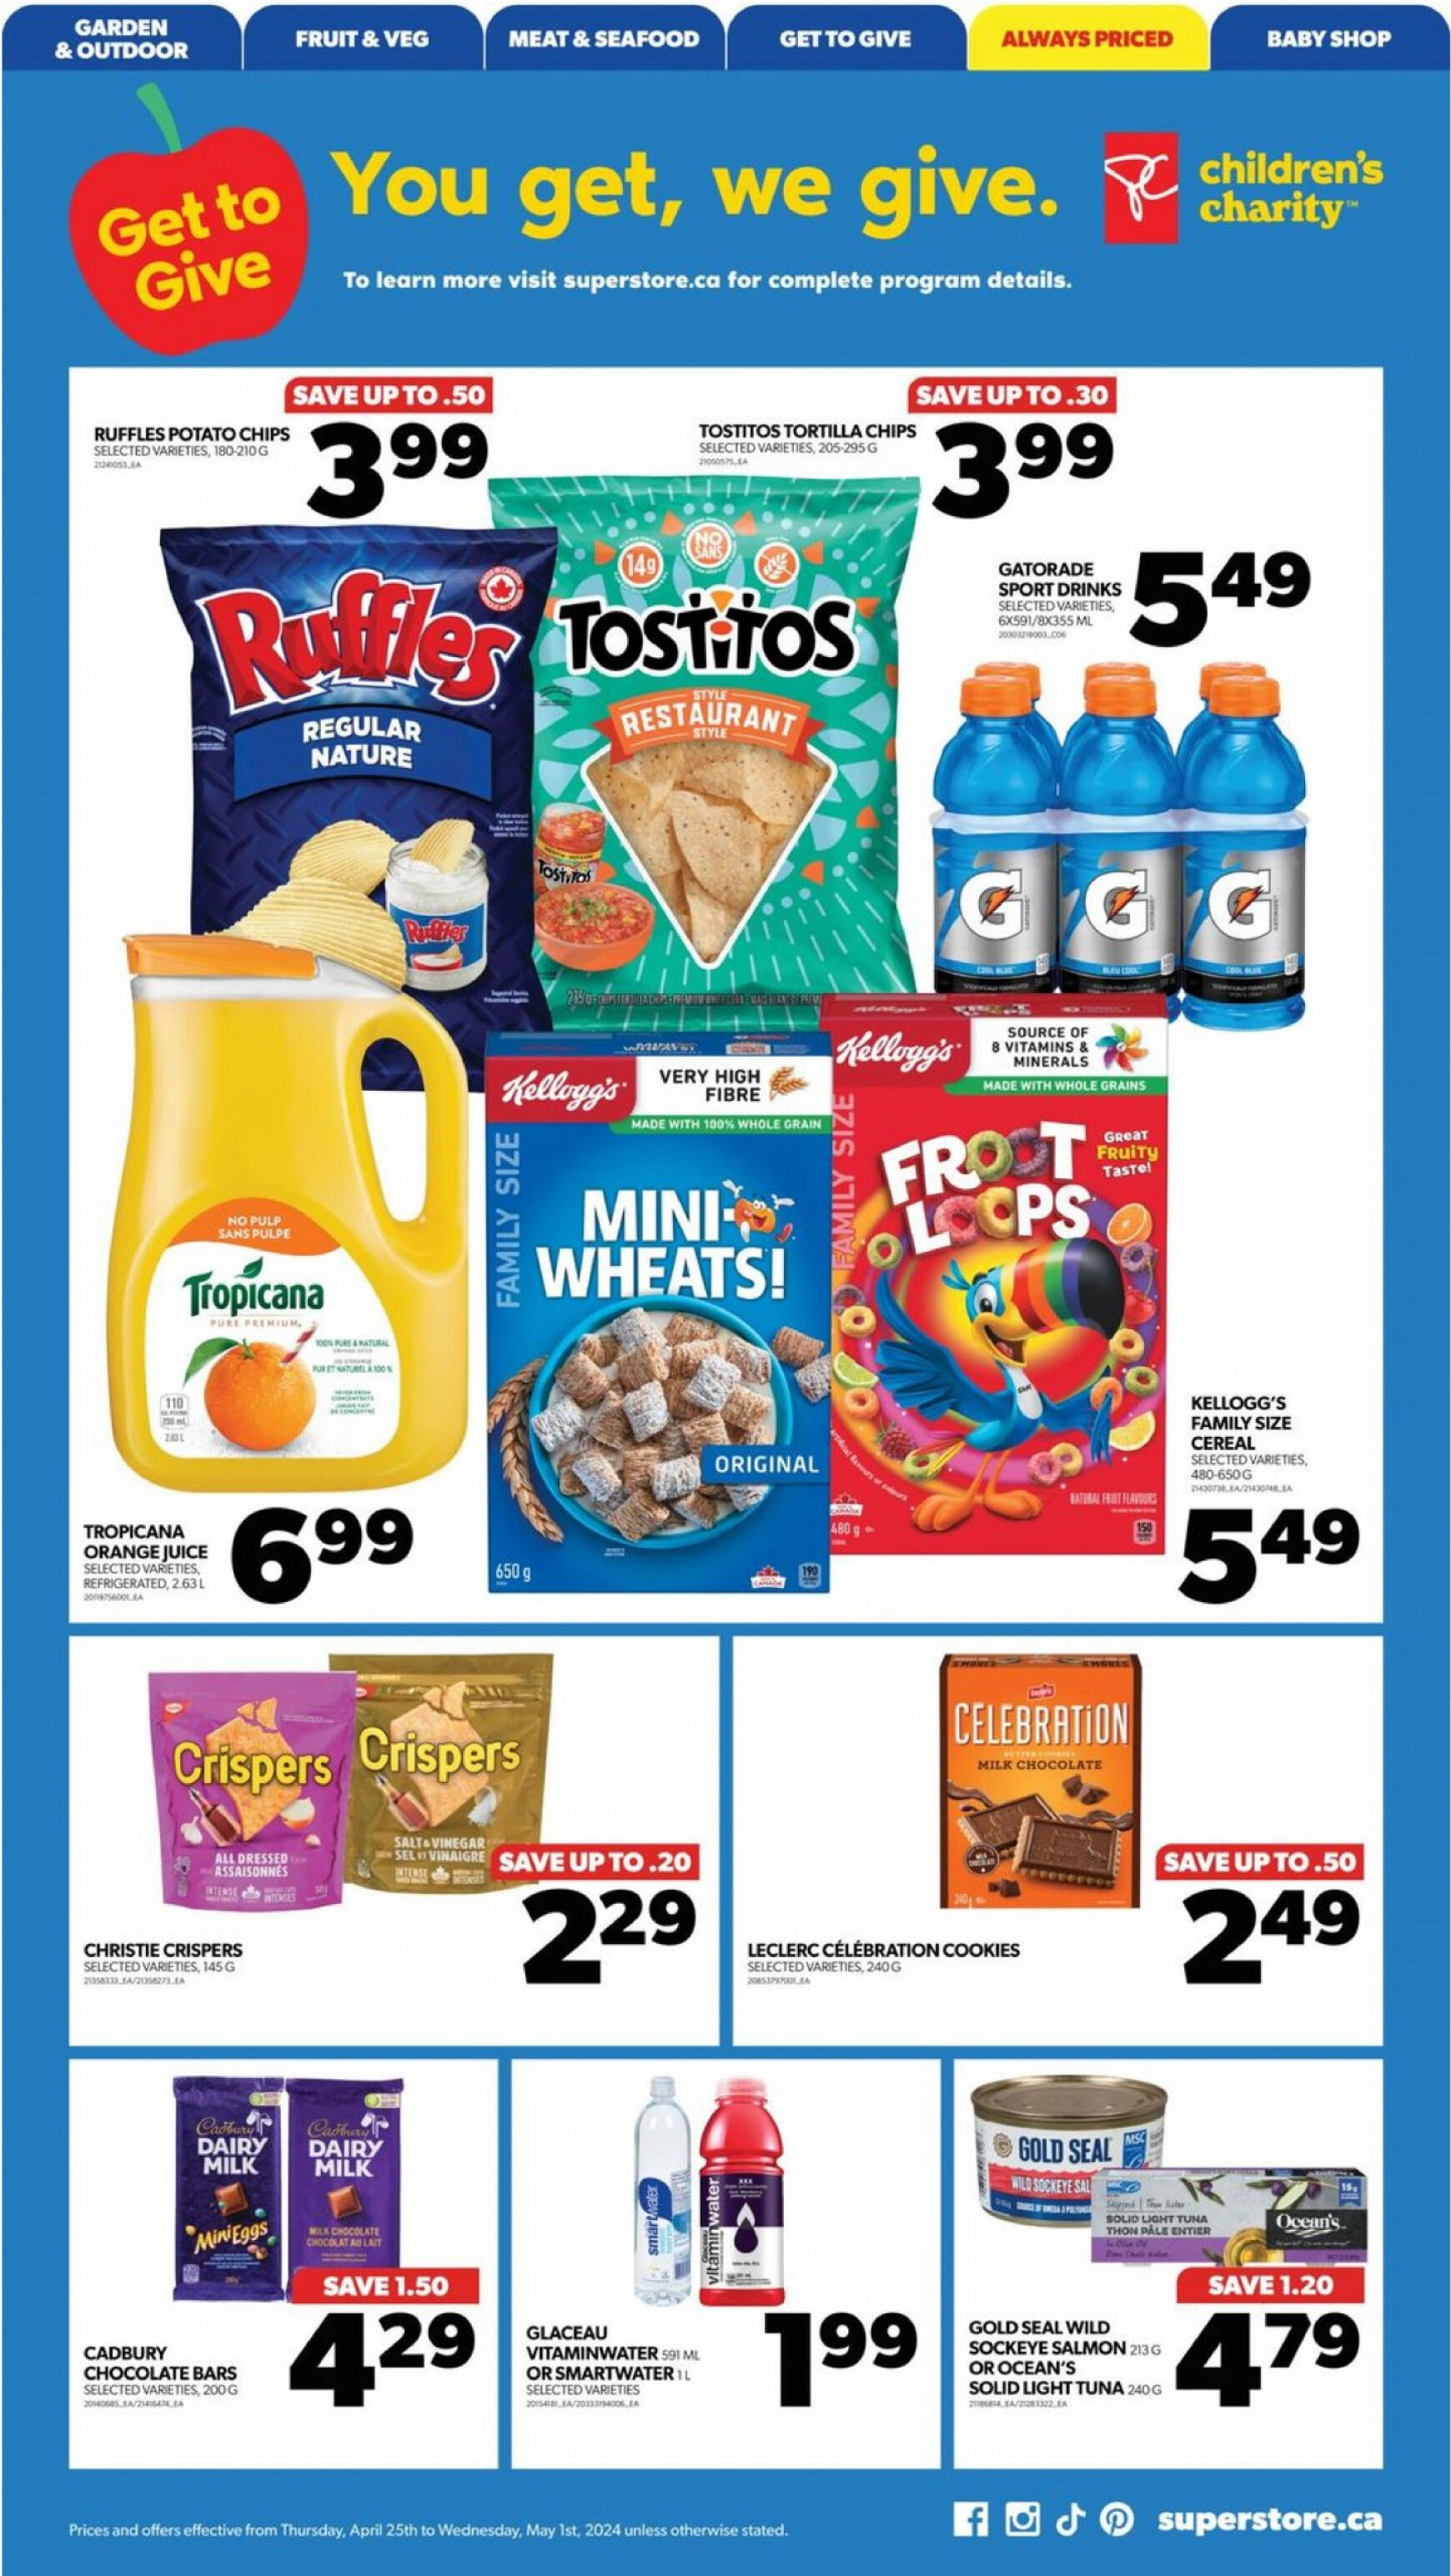 real-canadian-superstore - Real Canadian Superstore flyer current 01.05. - 31.05. - page: 11